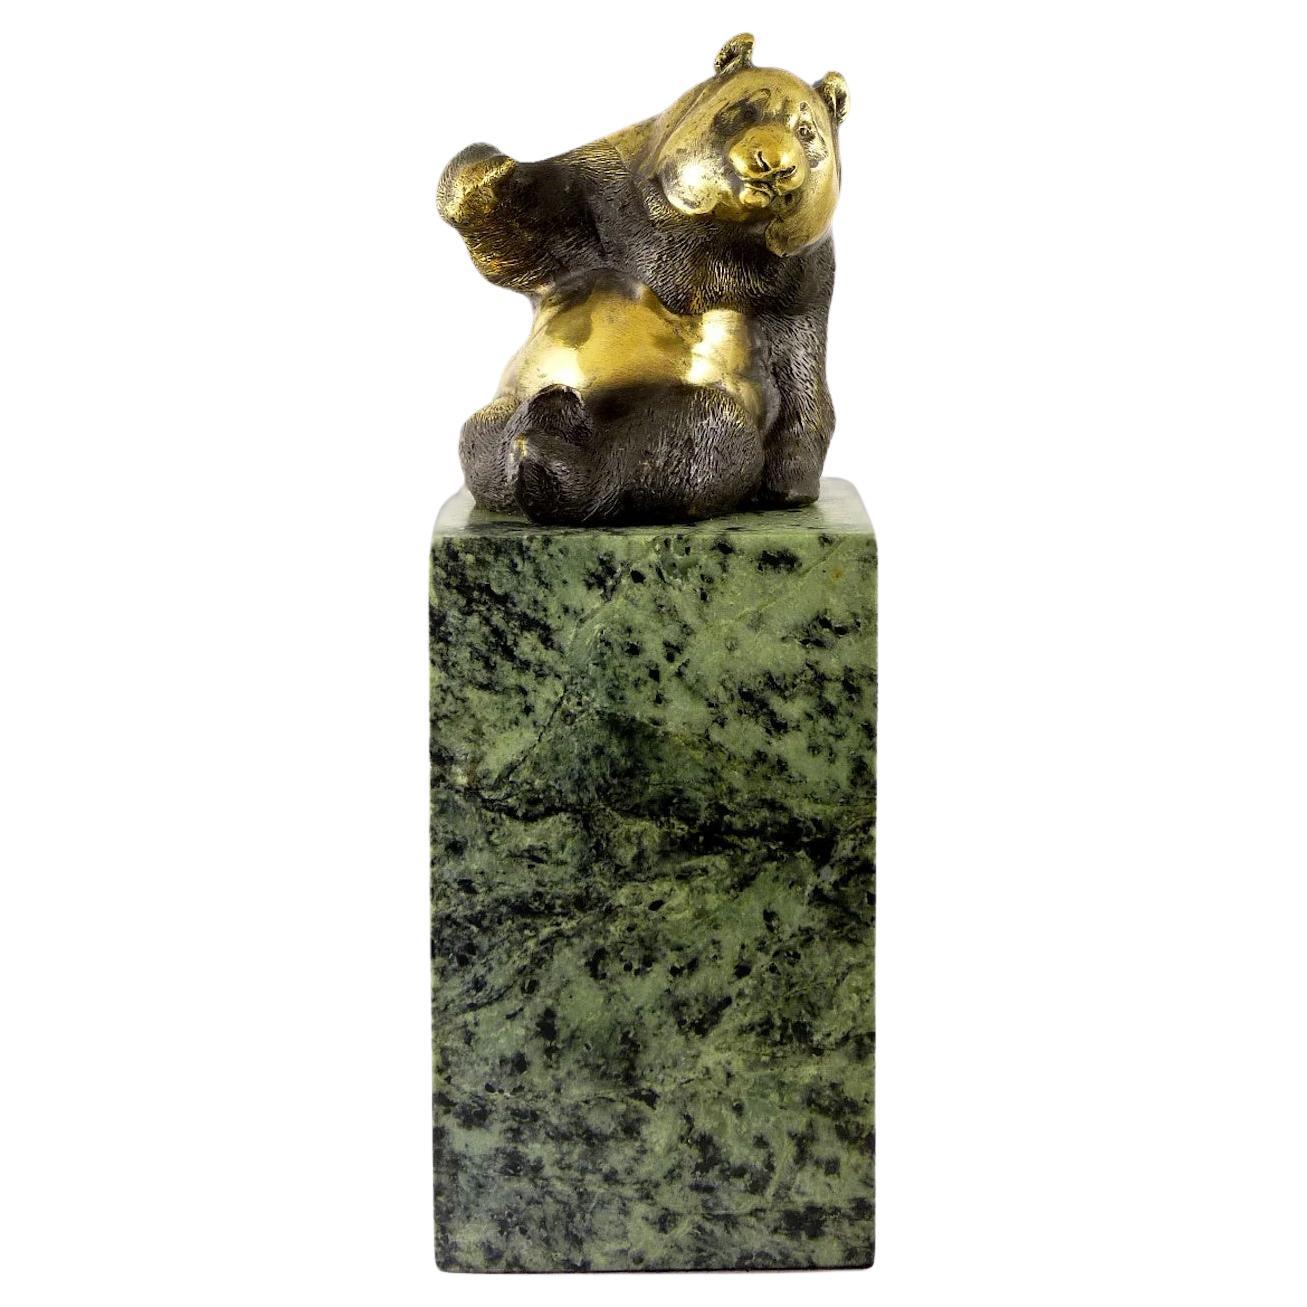 Gilded Bronze Sculpture with Patina Representing a Panda, 20th Century. For Sale